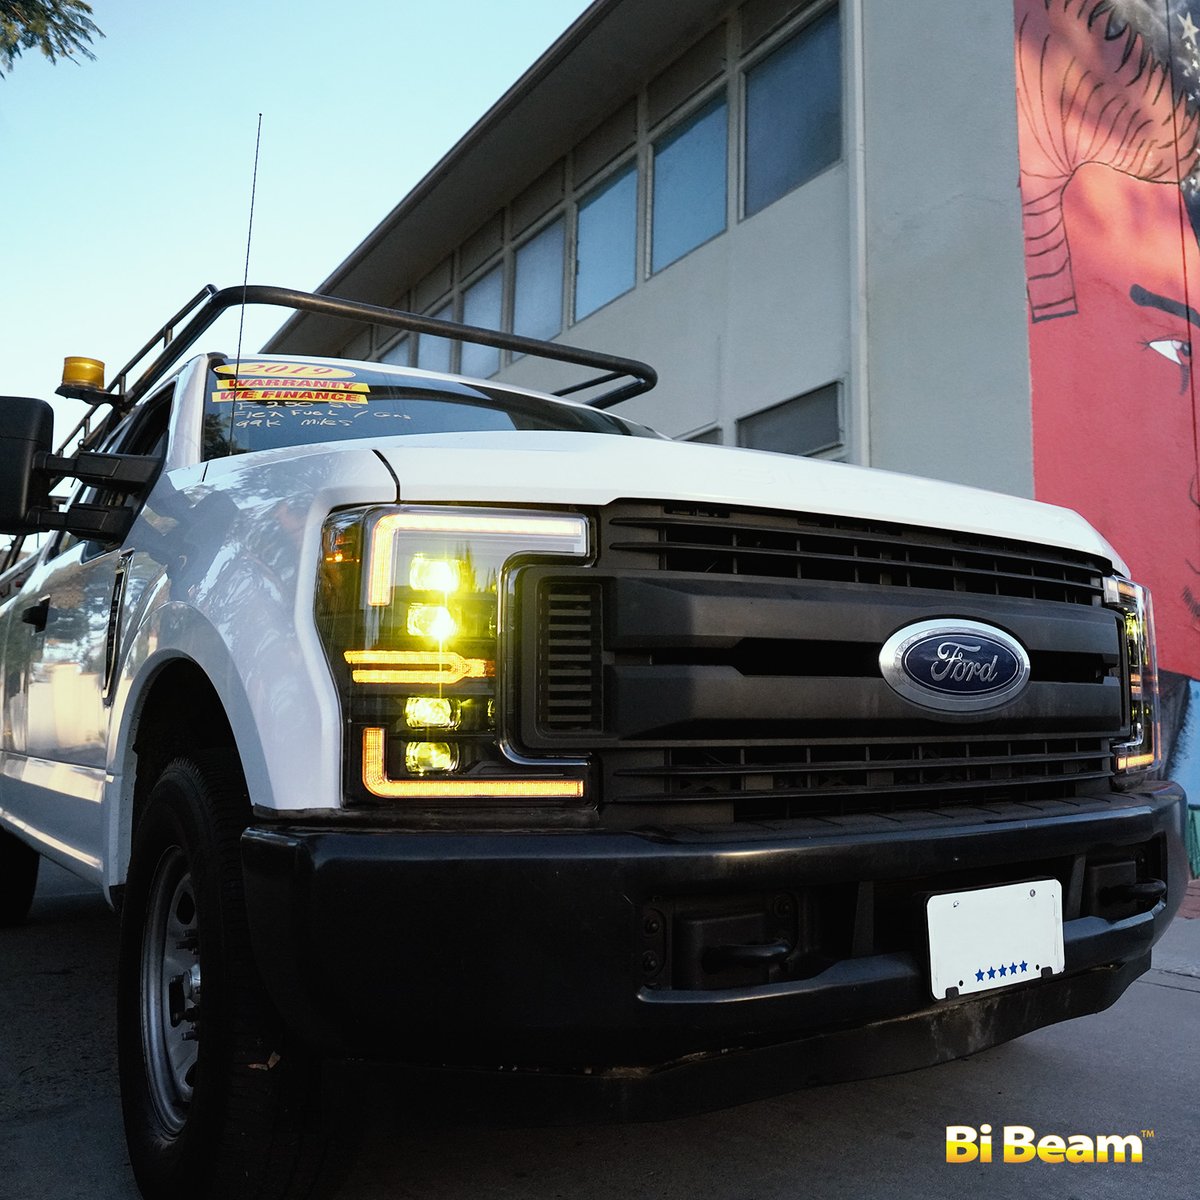 Brightness without limits! COPLUS F250 Infinite Headlights use four projector lenses to create the brightest high/low beams. Let your F250 shine brilliantly in the dark!

#ford #fordperformance #F250 #fordf250 #headlights #coplus